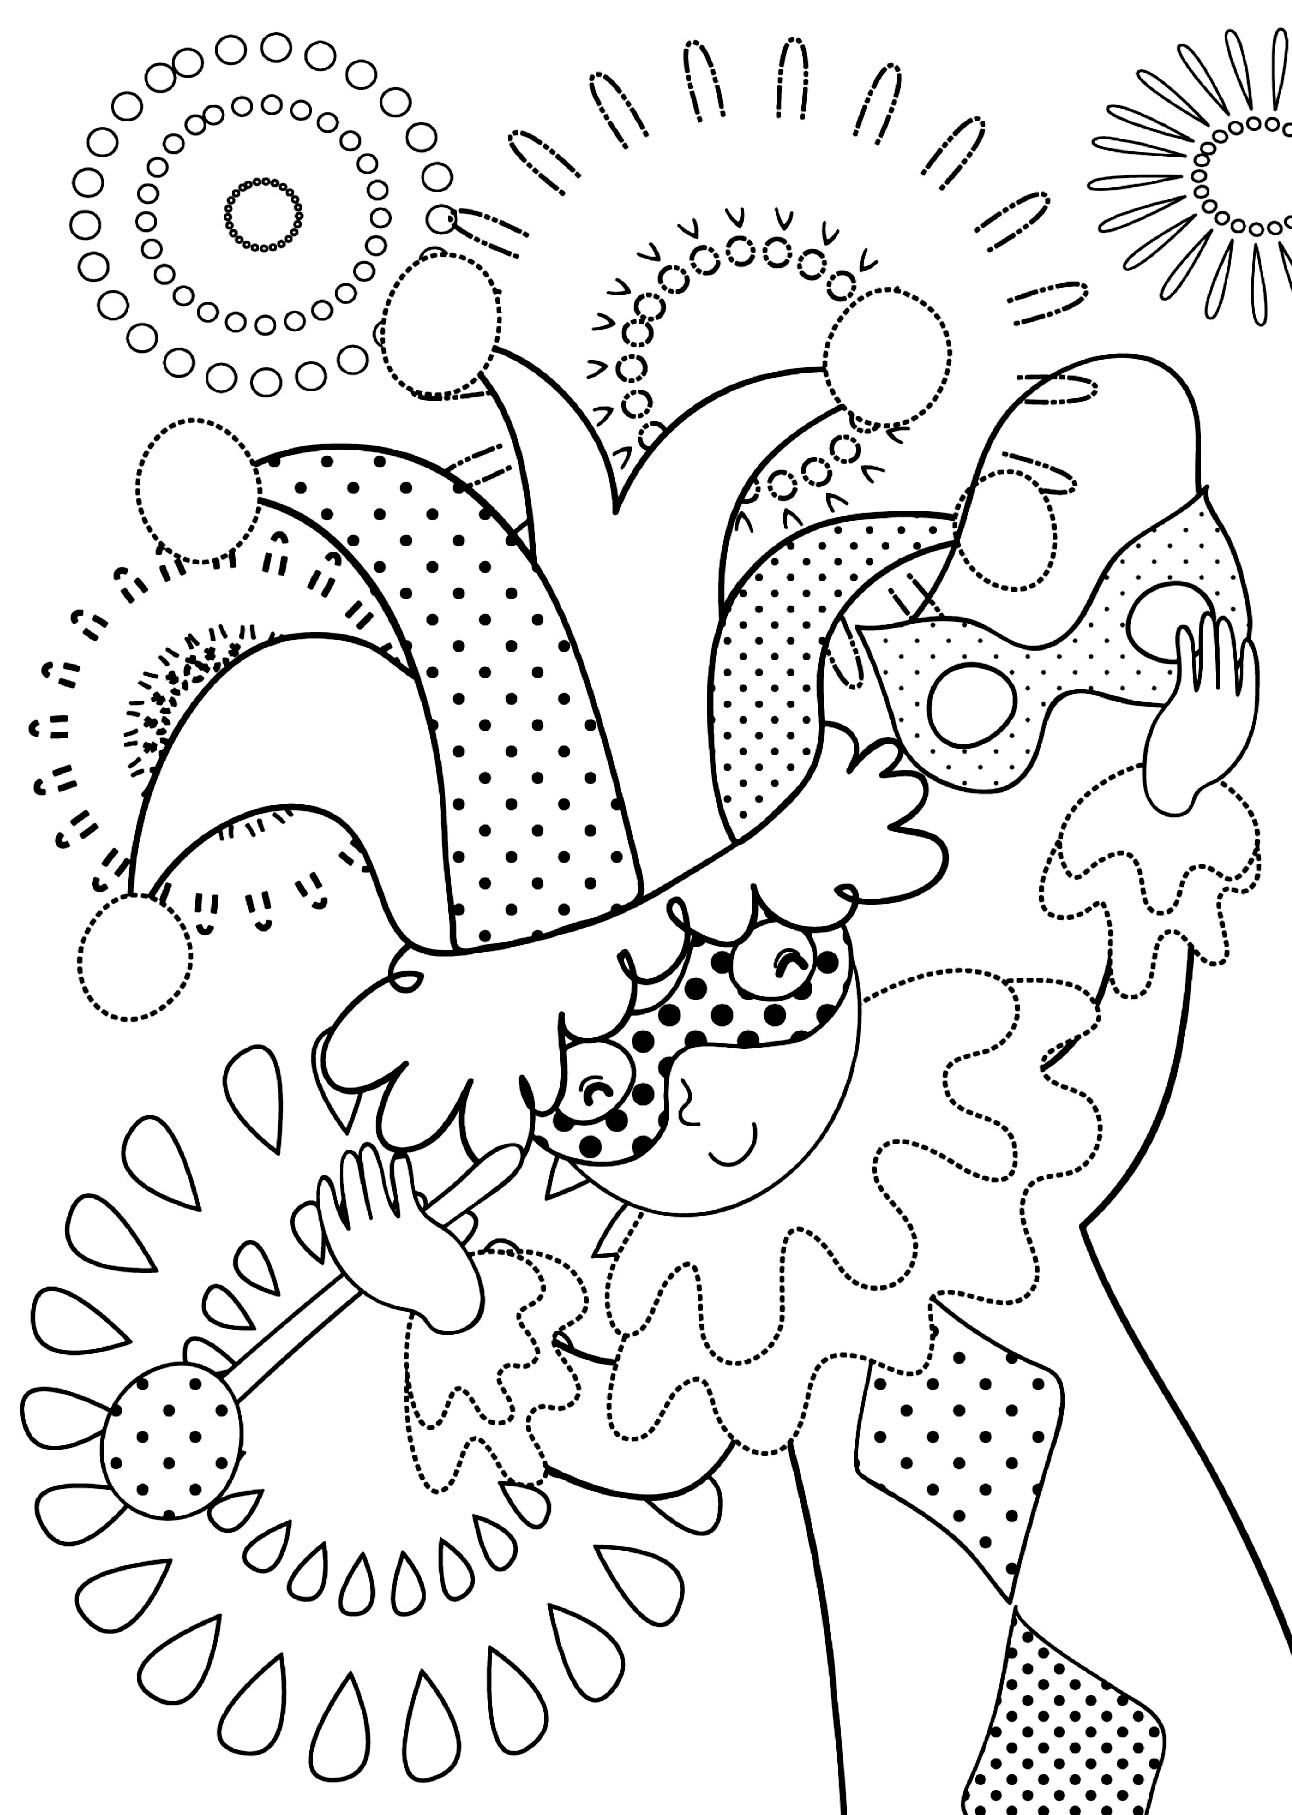 carnival-coloring-pages-printable